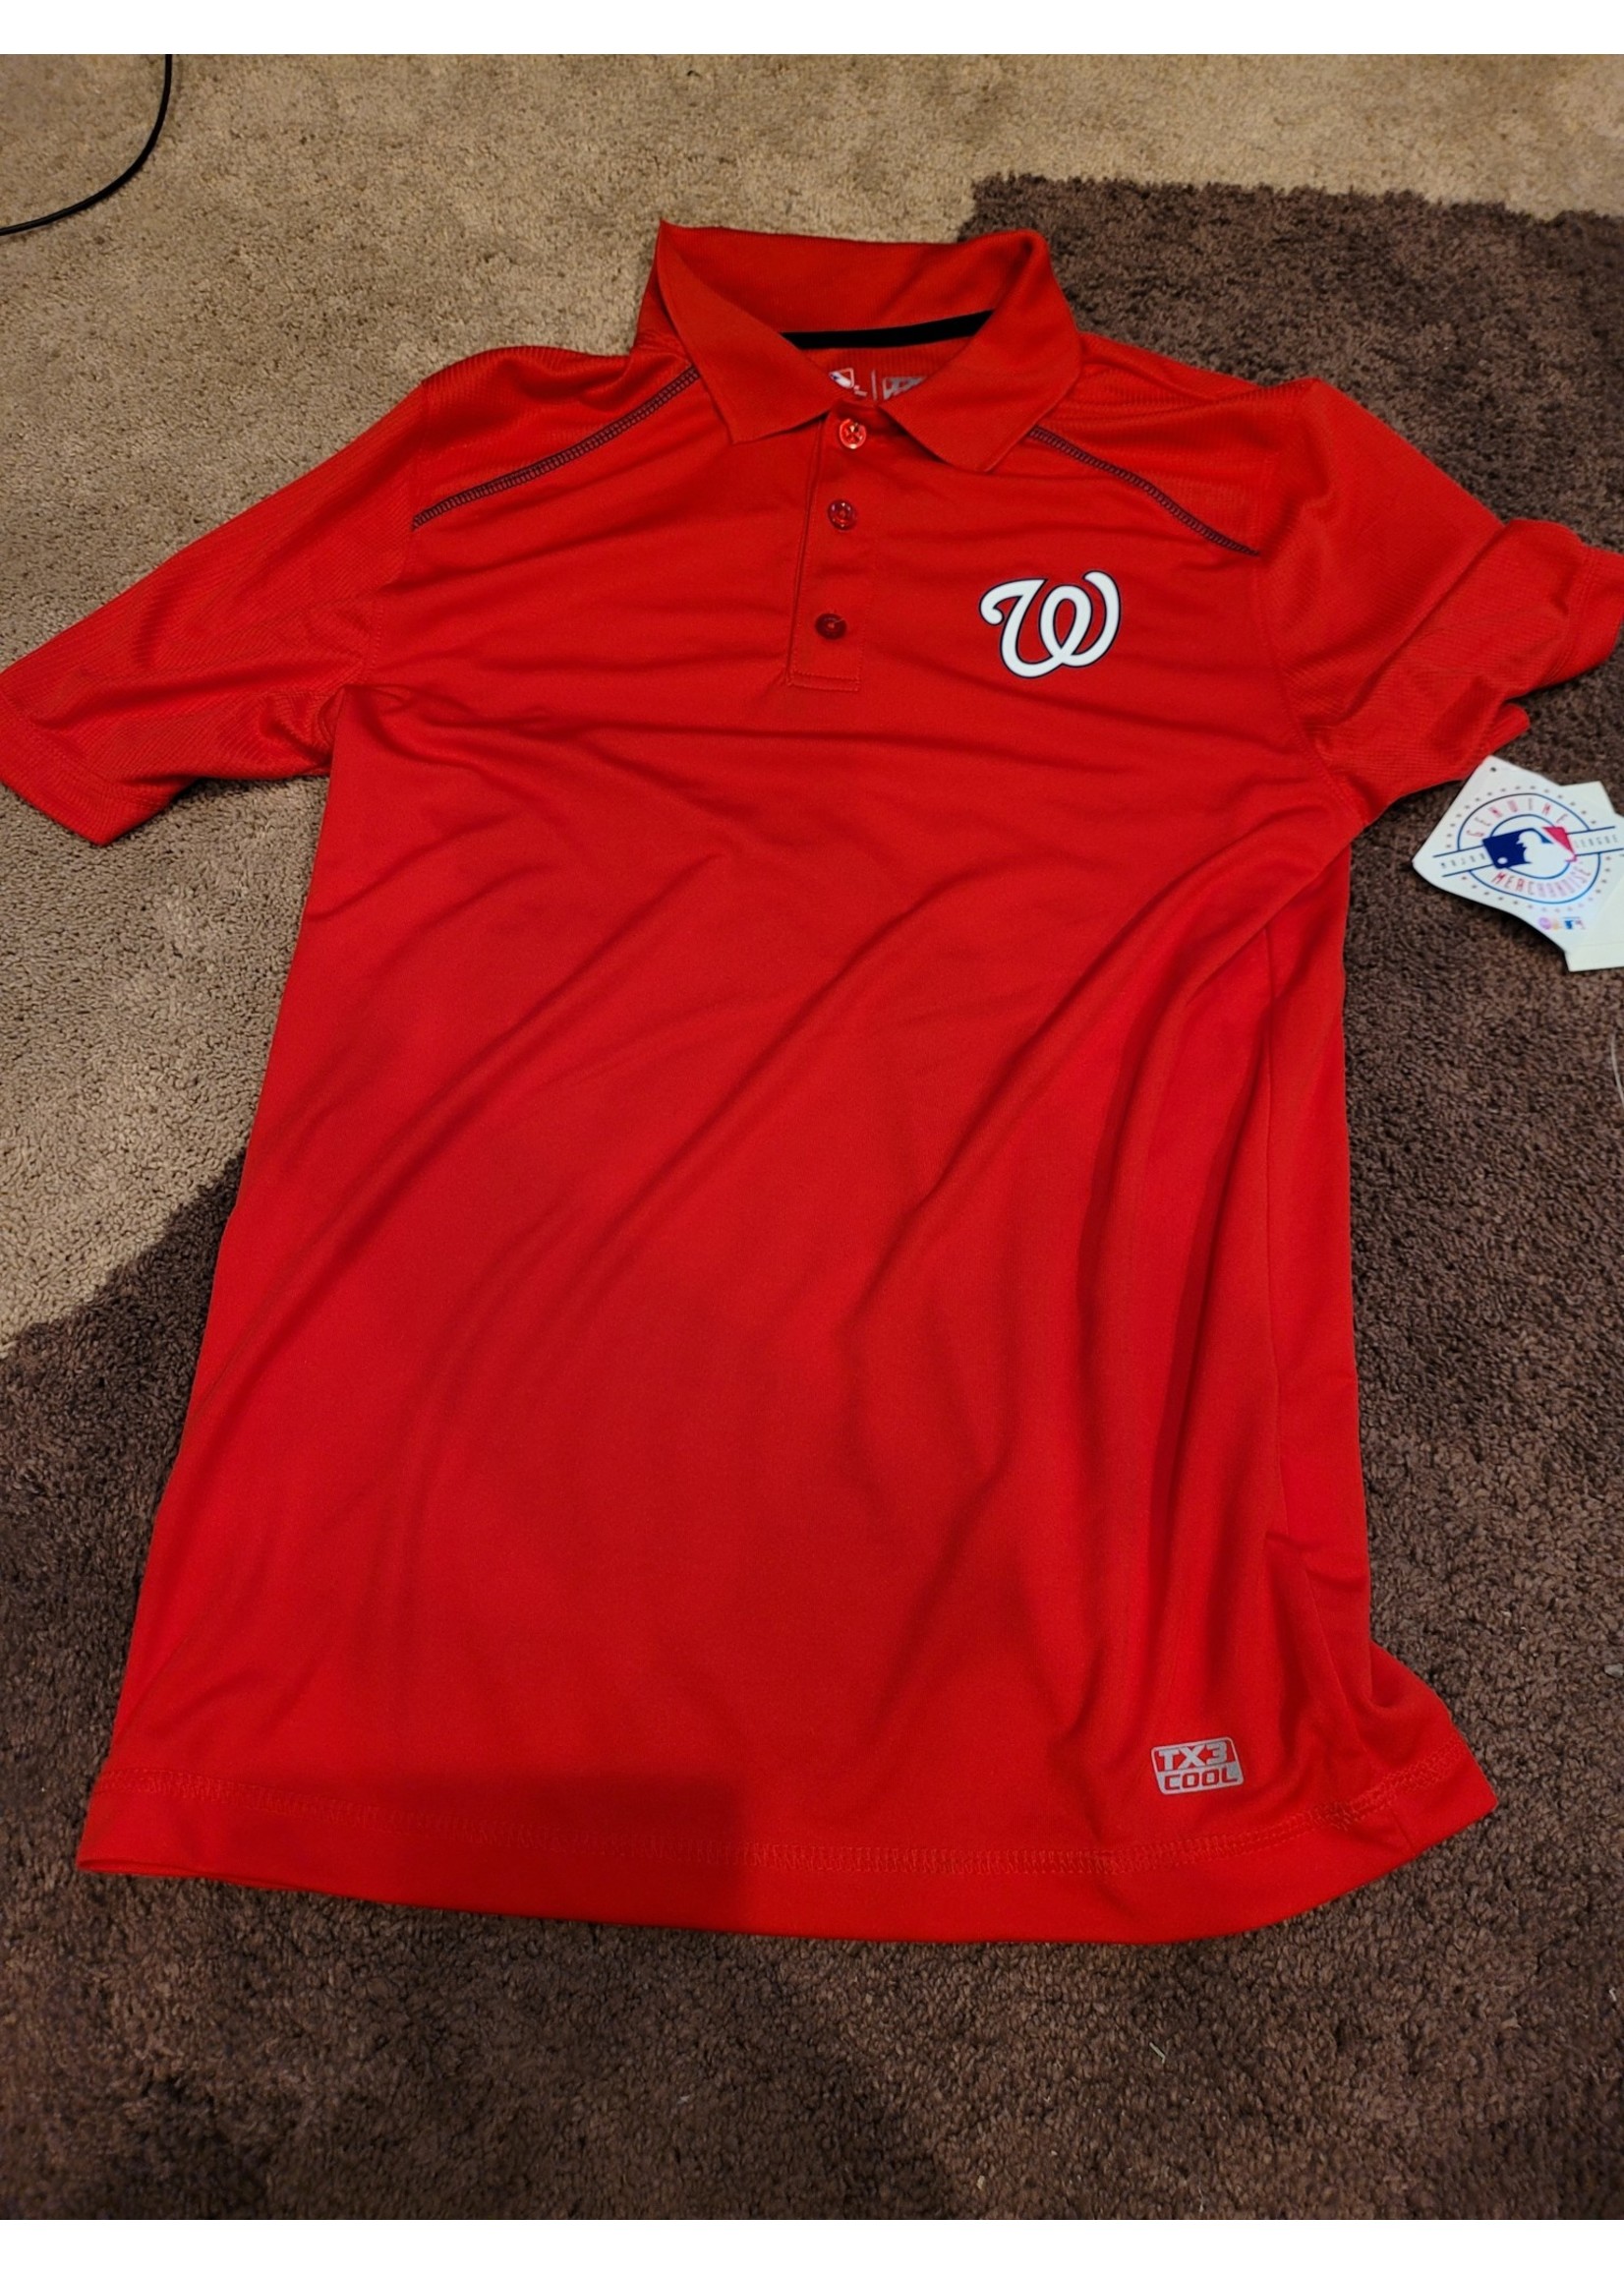 Mens MLB Washington Nationals Polo Small - D3 Surplus Outlet